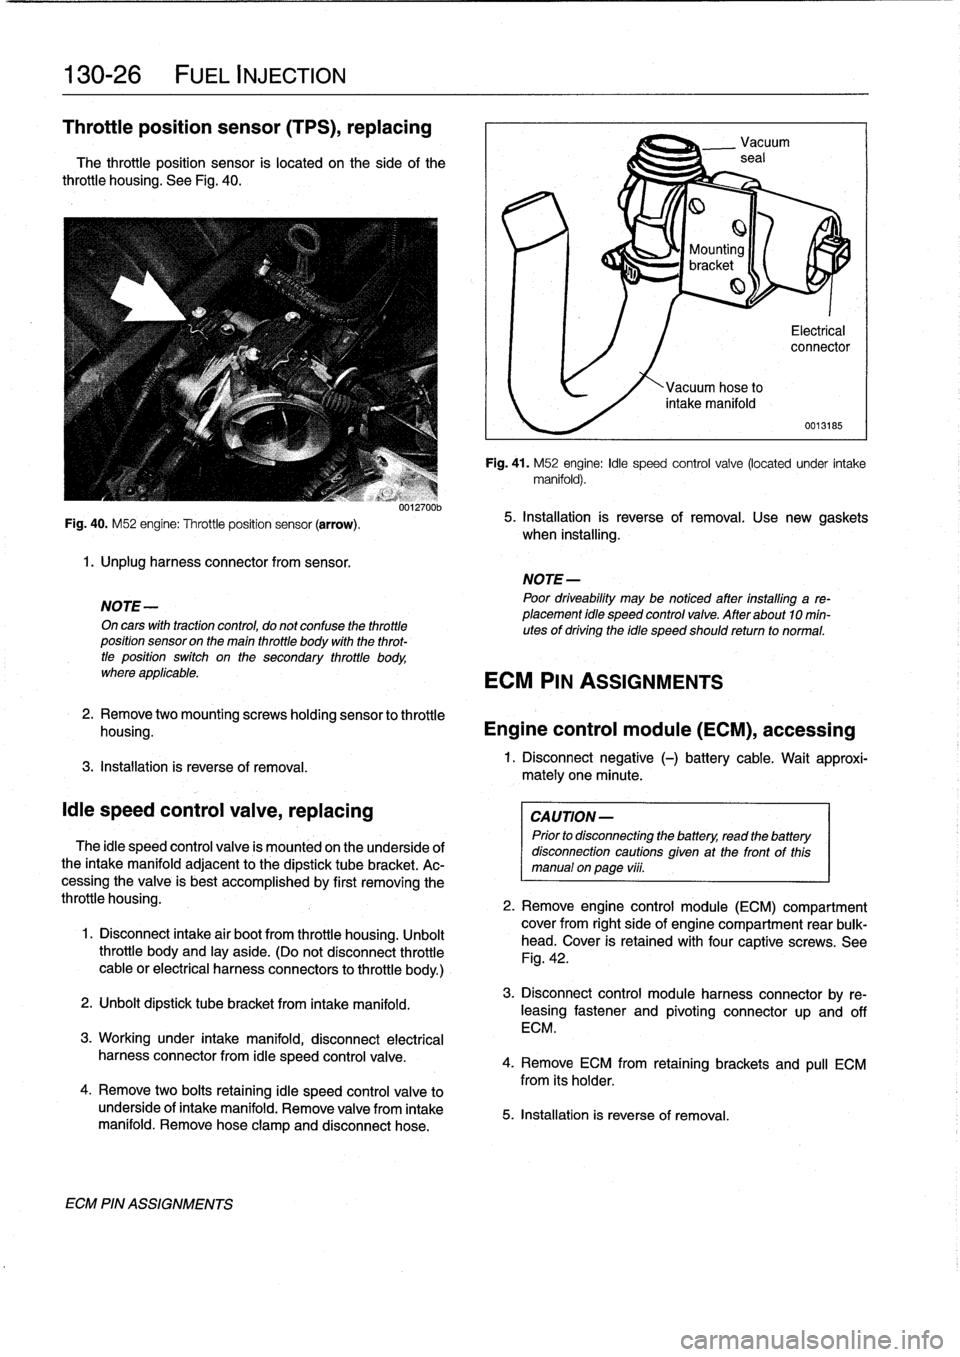 BMW 318i 1997 E36 Workshop Manual 
130-26

	

FUEL
INJECTION

Throttle
position
sensor
(TPS),
replacing

The
throttie
position
sensor
is
located
on
the
side
of
the
throttie
housing
.
See
Fig
.
40
.

Fig
.
40
.
M52
engine
:
Throttle
po